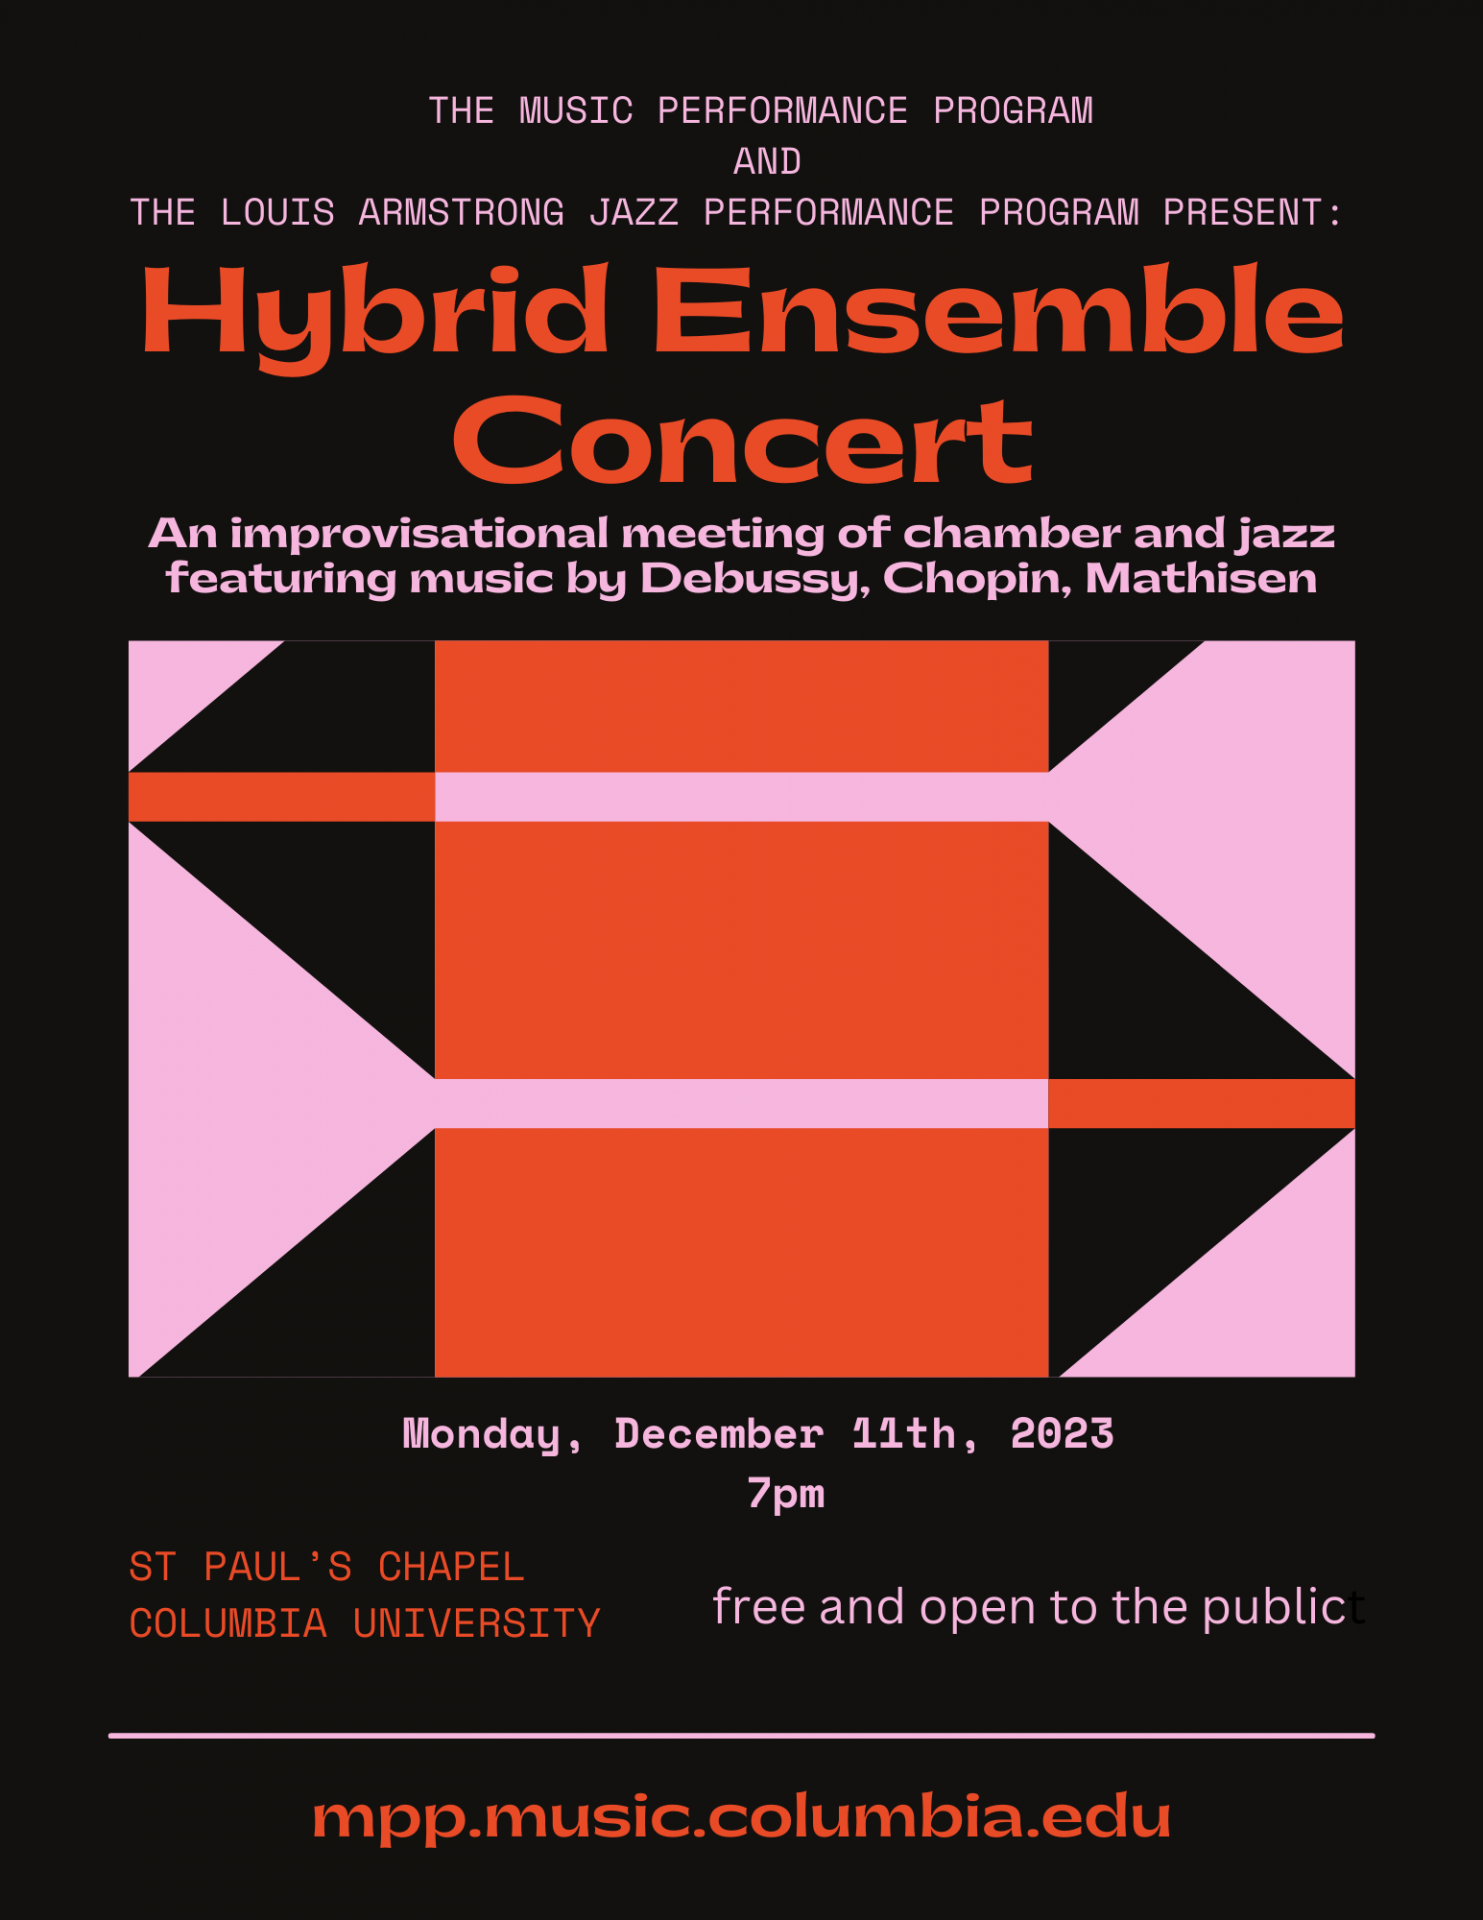 Hybrid Ensemble Concert: "an improvisational meeting of chamber and jazz featuring music by Debussy, Chopin, and Mathisen" on Monday, December 11th, 2023 7pm. 